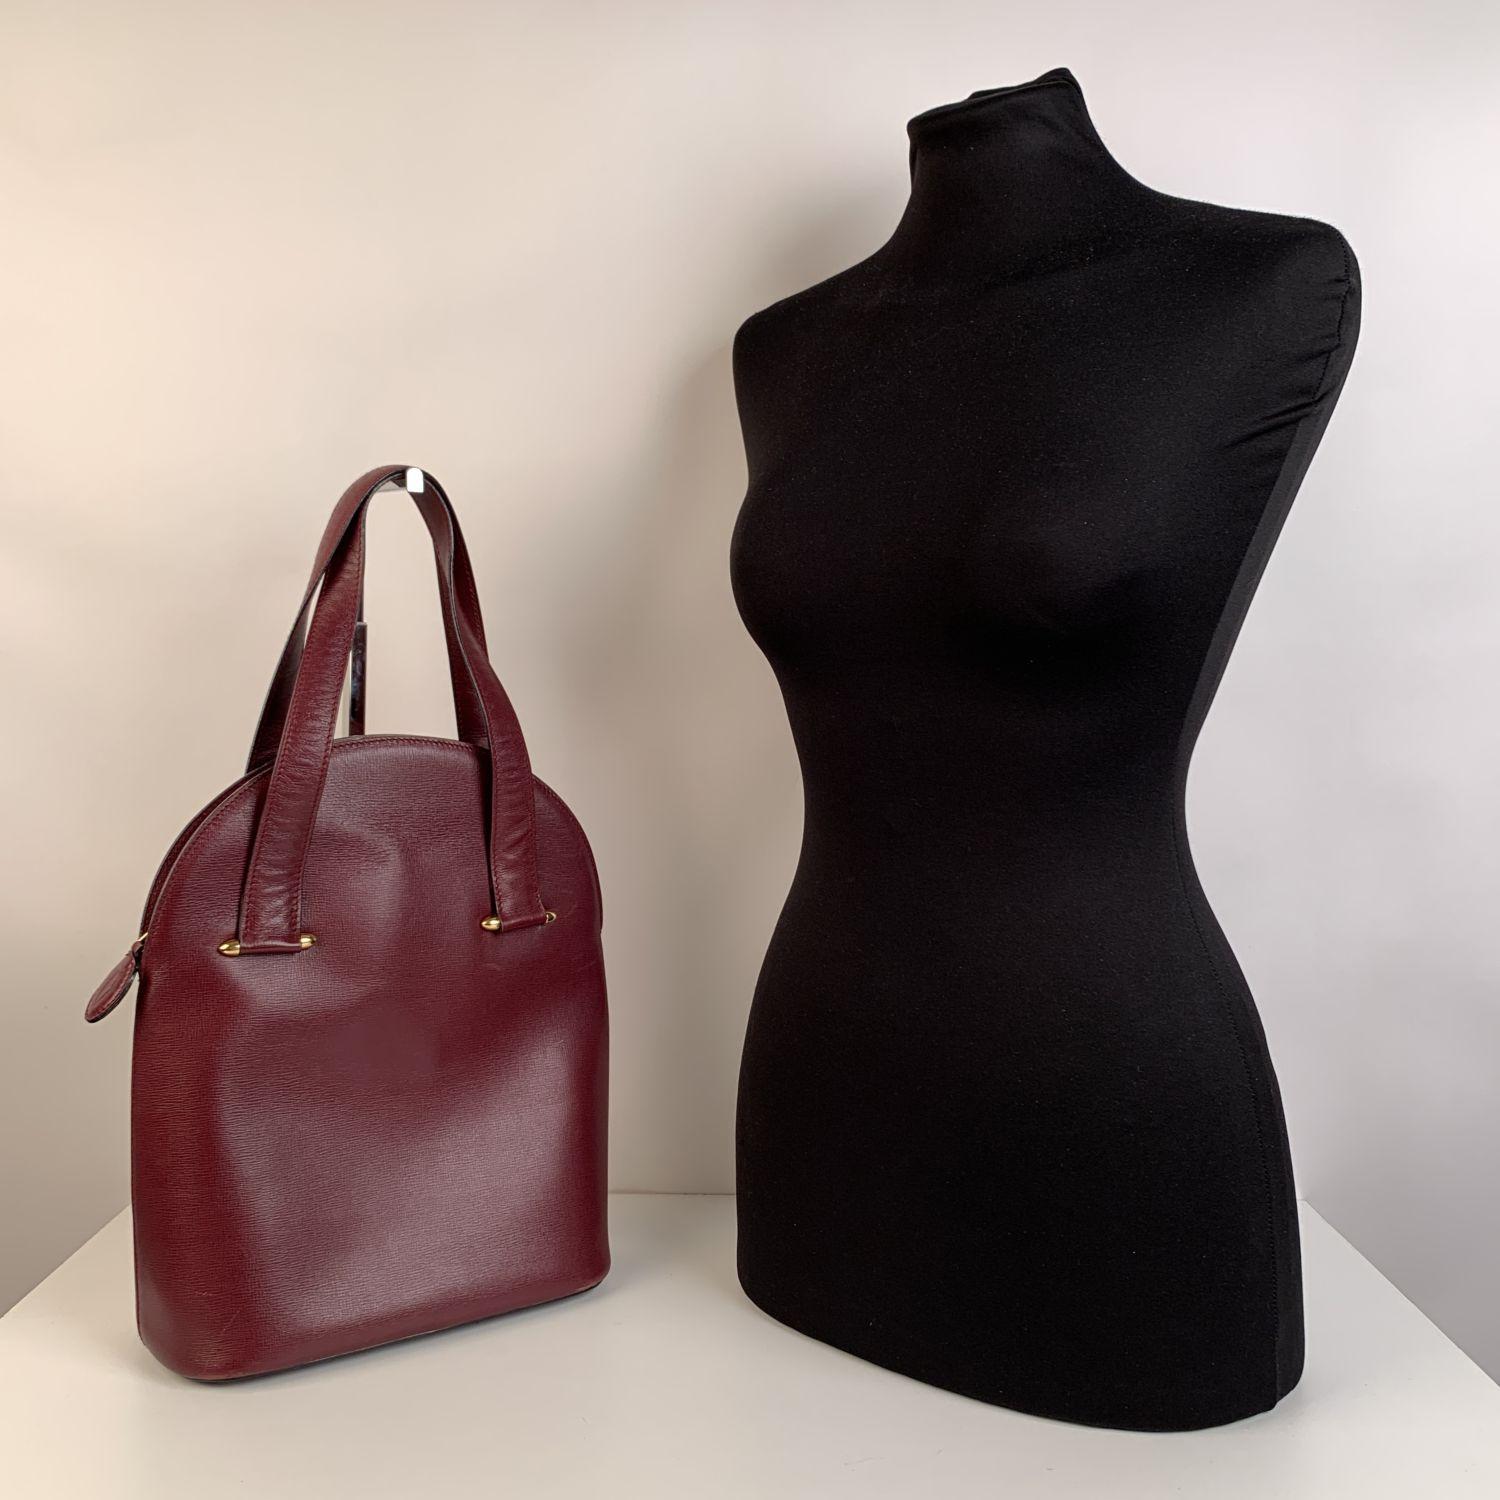 Vintage Cartier tote handbag, crafted in burgundy leather. Upper zipper closure. 4 bottom feet. Burgundy lining with CARTIER signature's pattern. 1 side zip pocket & 1 side open pocket inside. 'Cartier Paris' tag inside.


Details

MATERIAL: